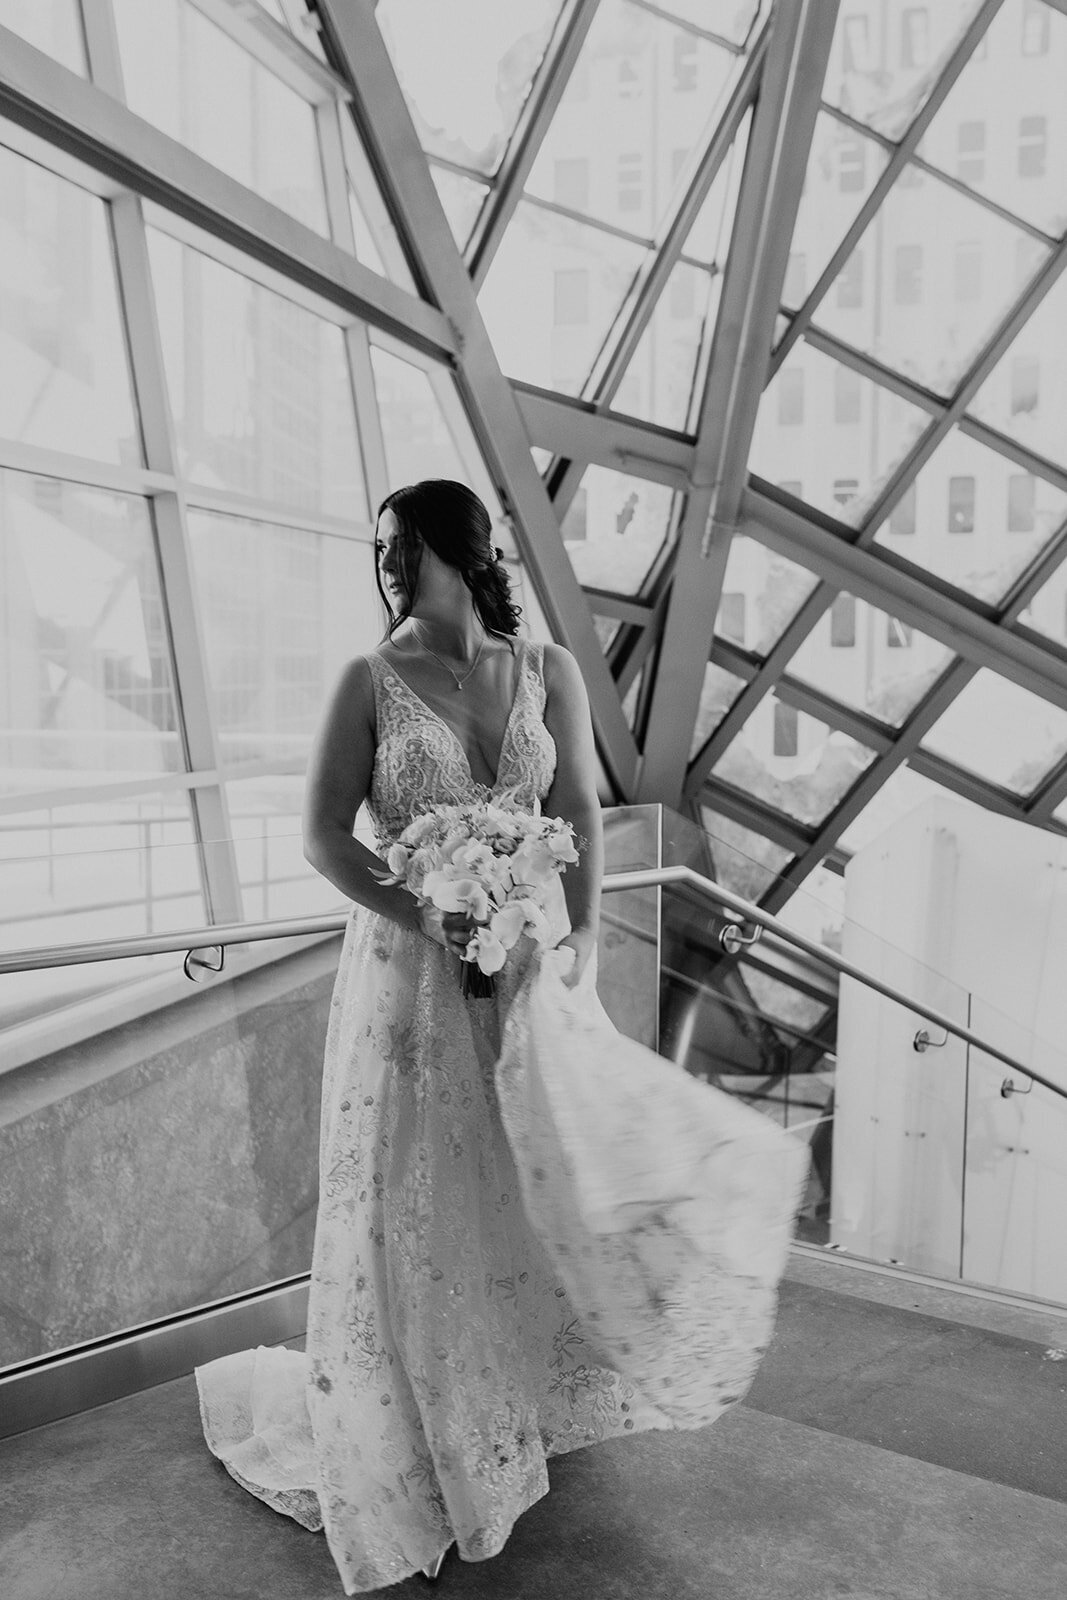 Black and white photo of the bride in her wedding dress looking out the window.